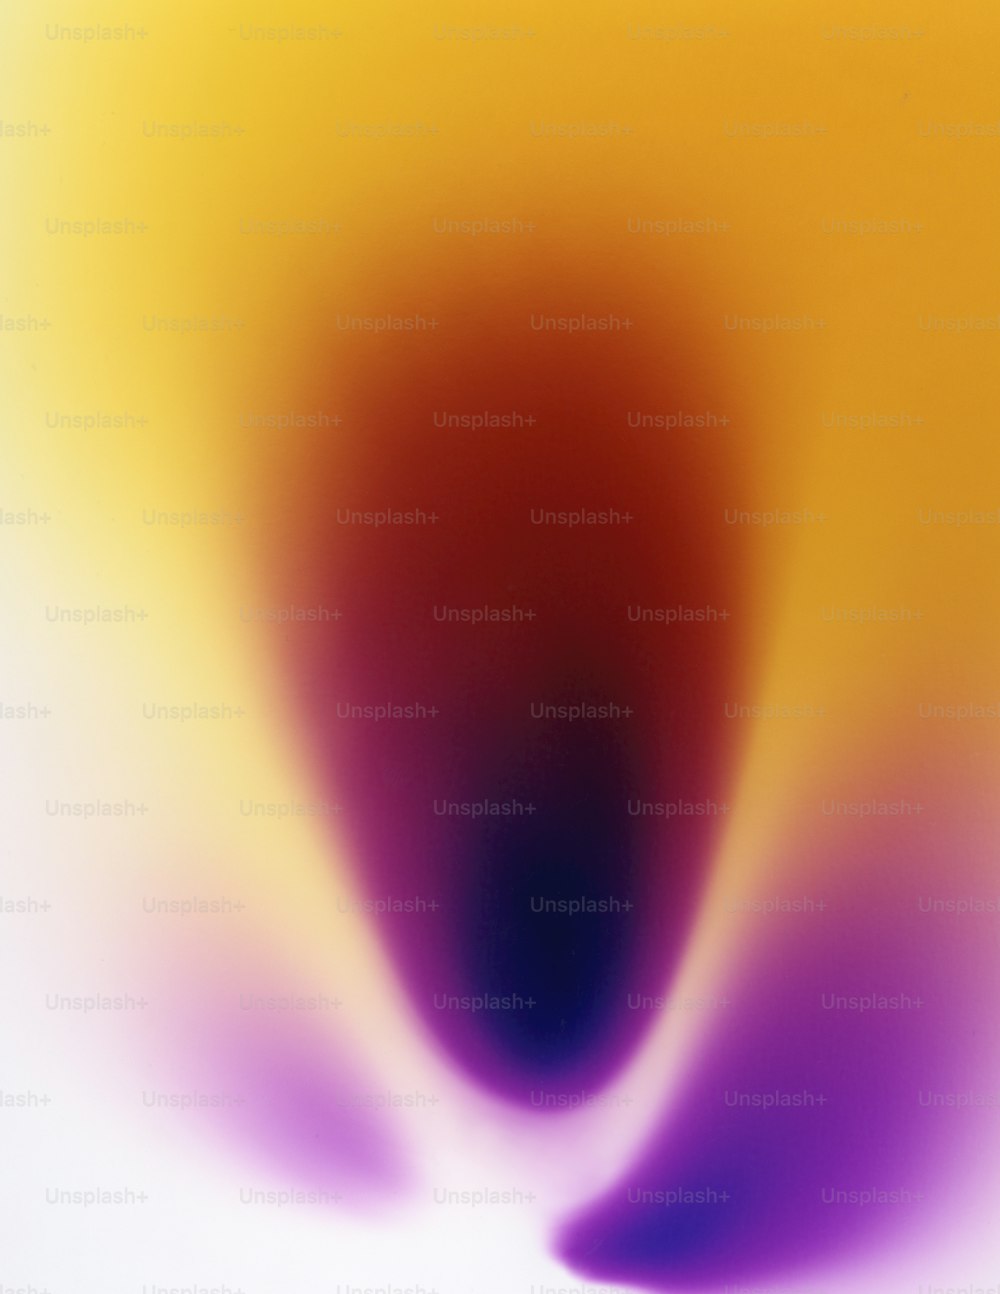 a blurry image of a yellow and purple object